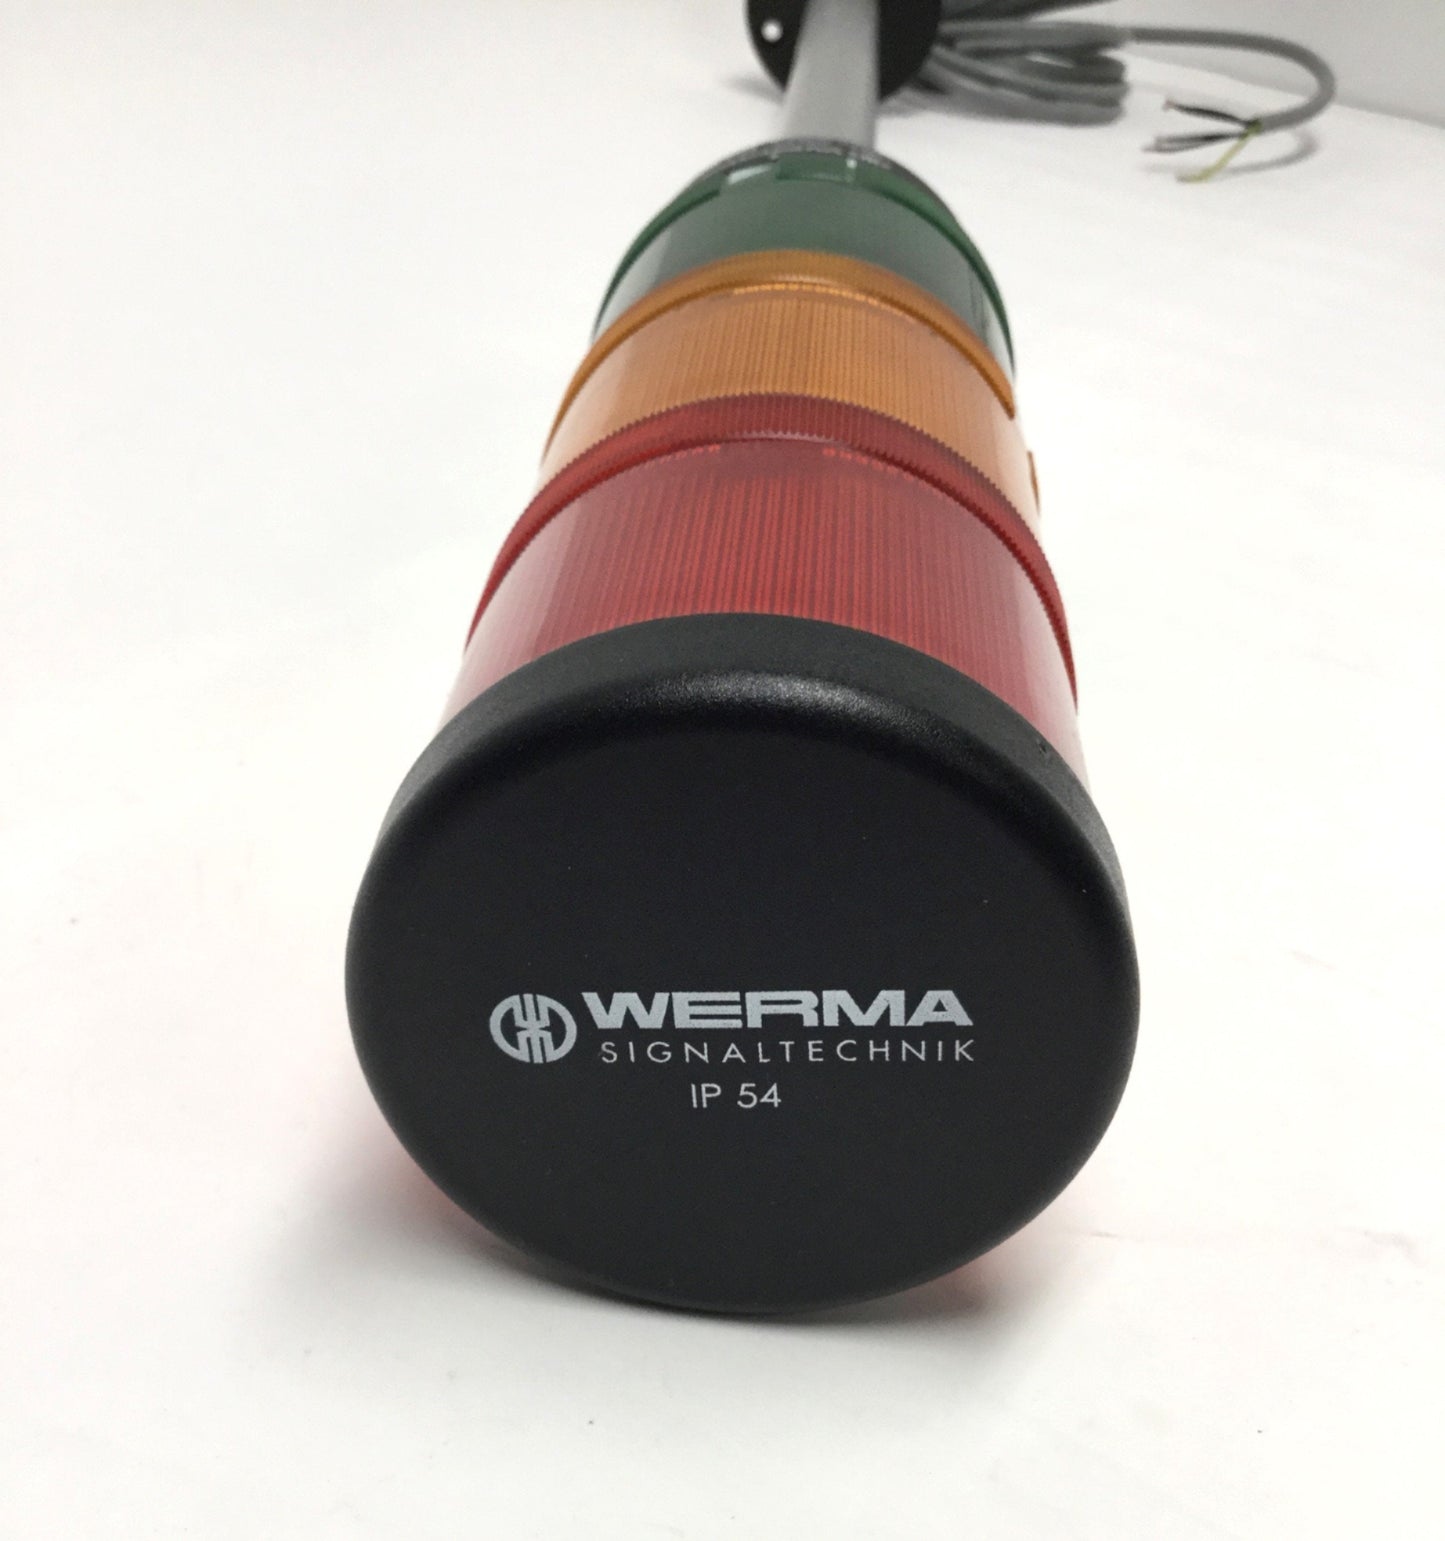 Used Werma 840.080.00 KombiSIGN Signal Tower Stacklight 24V Red, Green, Amber, 24"